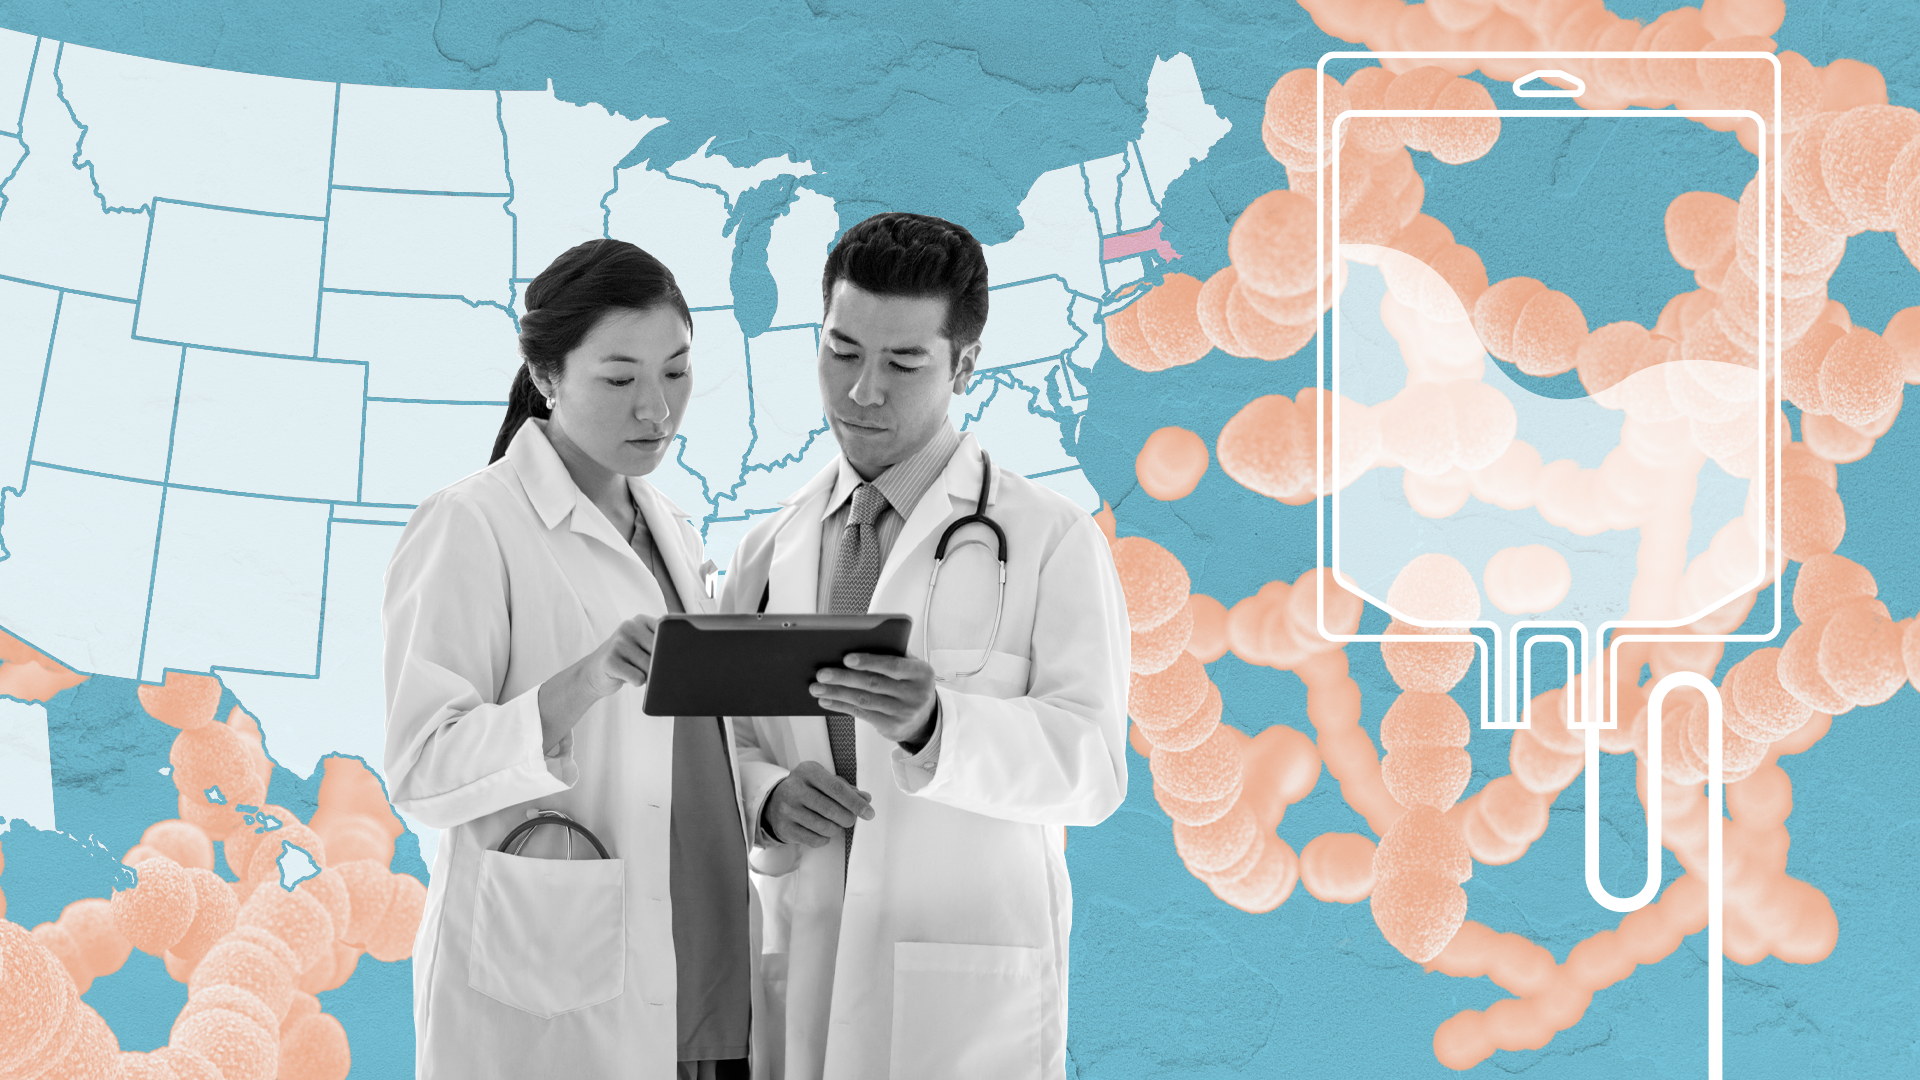 Two doctors looking at an iPad in front of an illustration of a map and superbugs.